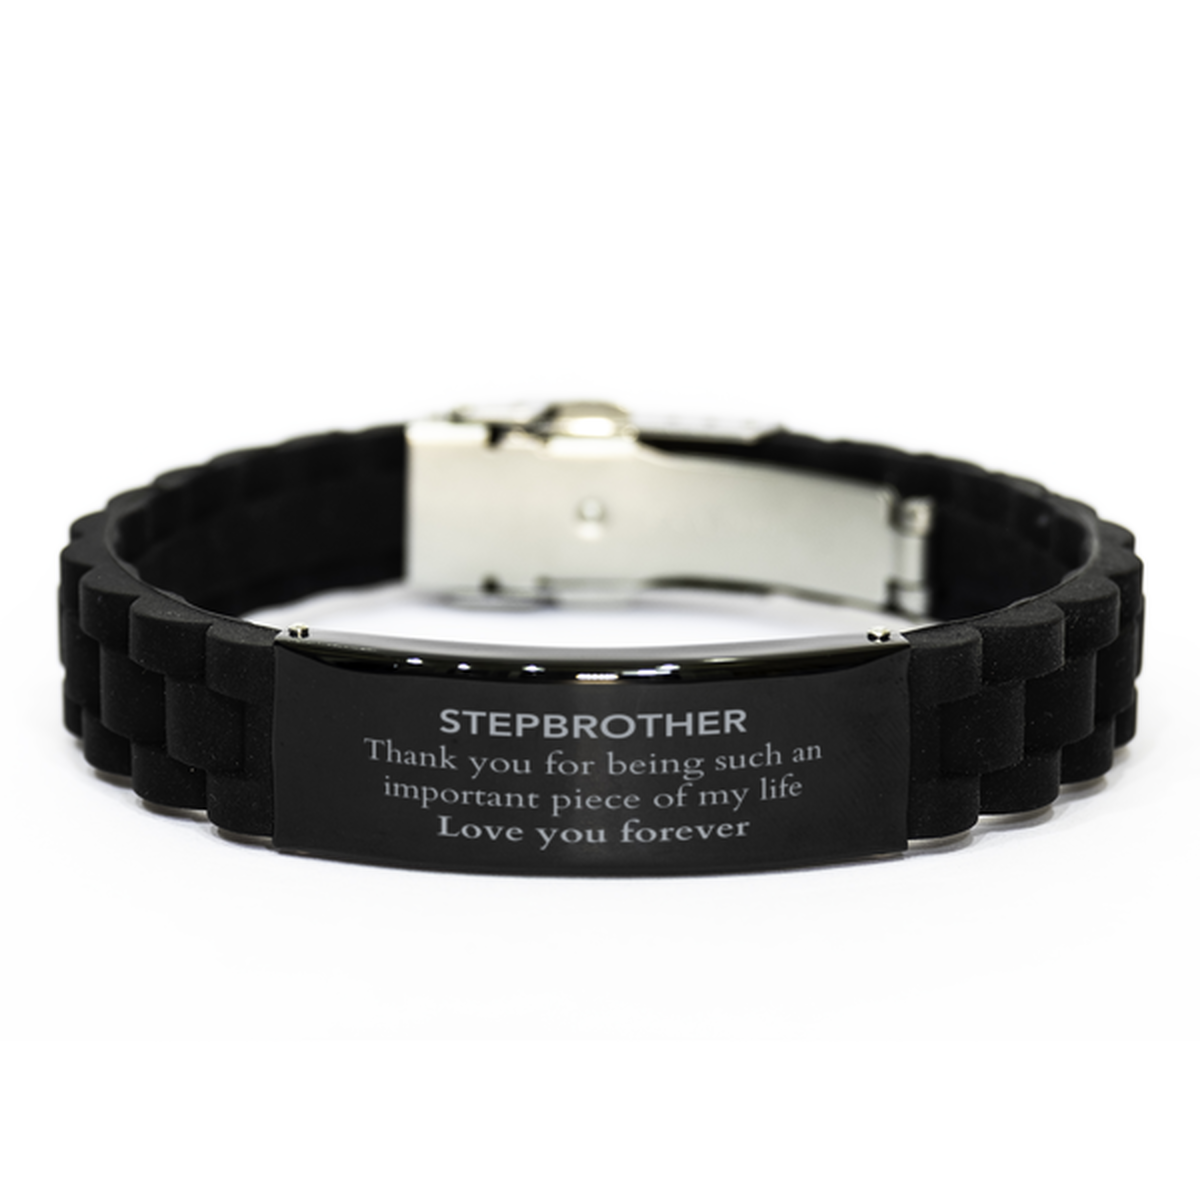 Appropriate Stepbrother Black Glidelock Clasp Bracelet Epic Birthday Gifts for Stepbrother Thank you for being such an important piece of my life Stepbrother Christmas Mothers Fathers Day